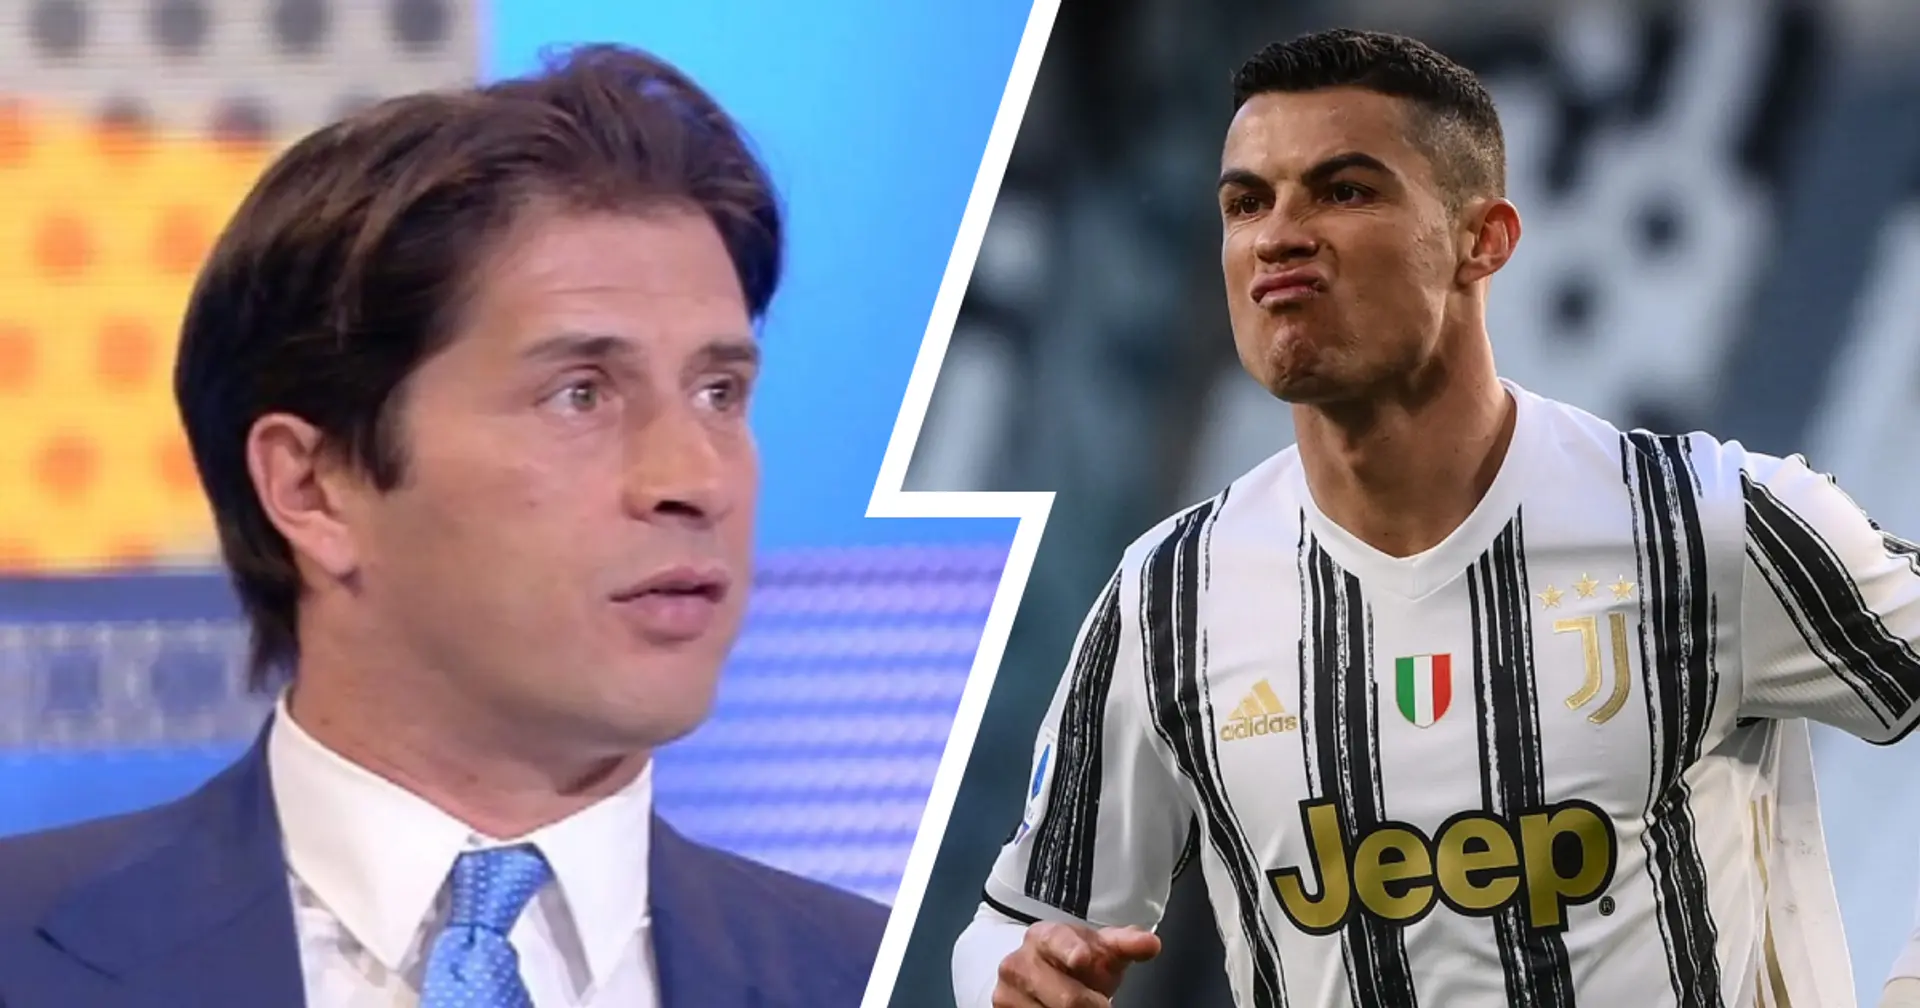 Juventus legend Tacchinardi slams Ronaldo for putting club 'in a difficult situation'